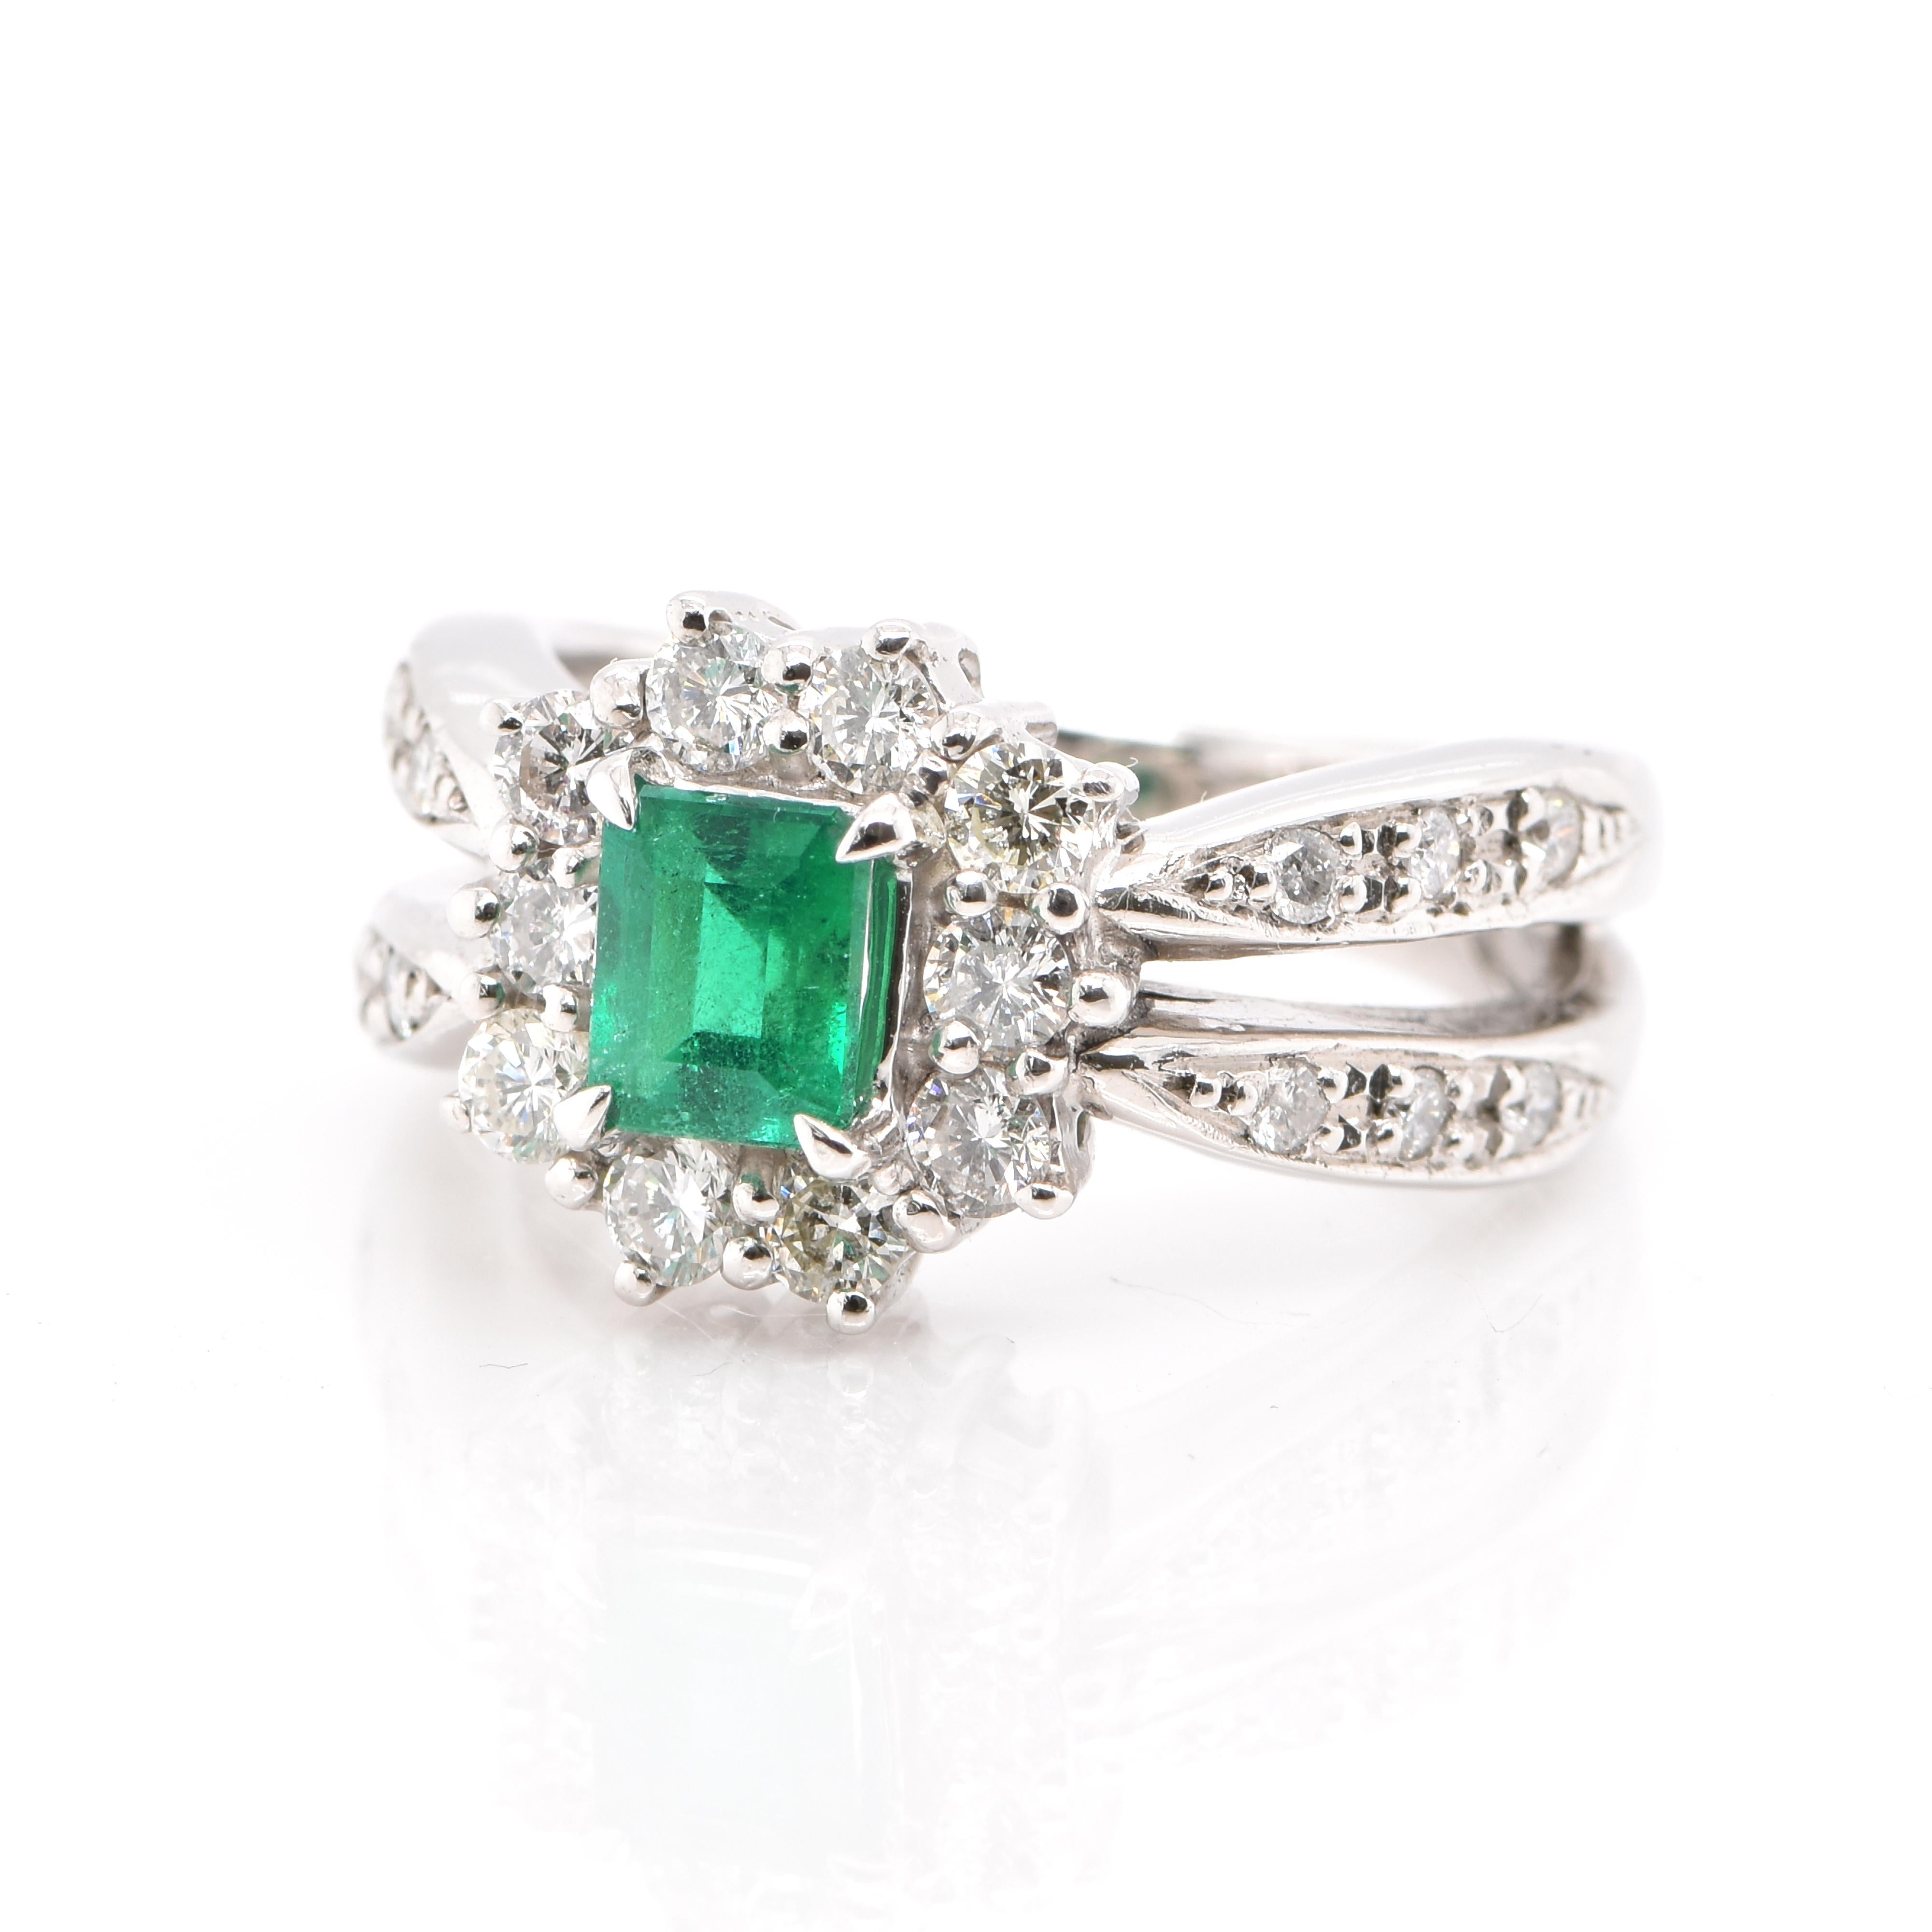 A beautifully made Ring with a 0.69 Carat, Natural Emerald and 0.64 Carats of White Round Brilliant Diamond Accents set in Platinum. People have admired emerald’s green for thousands of years. Emeralds have always been associated with the lushest